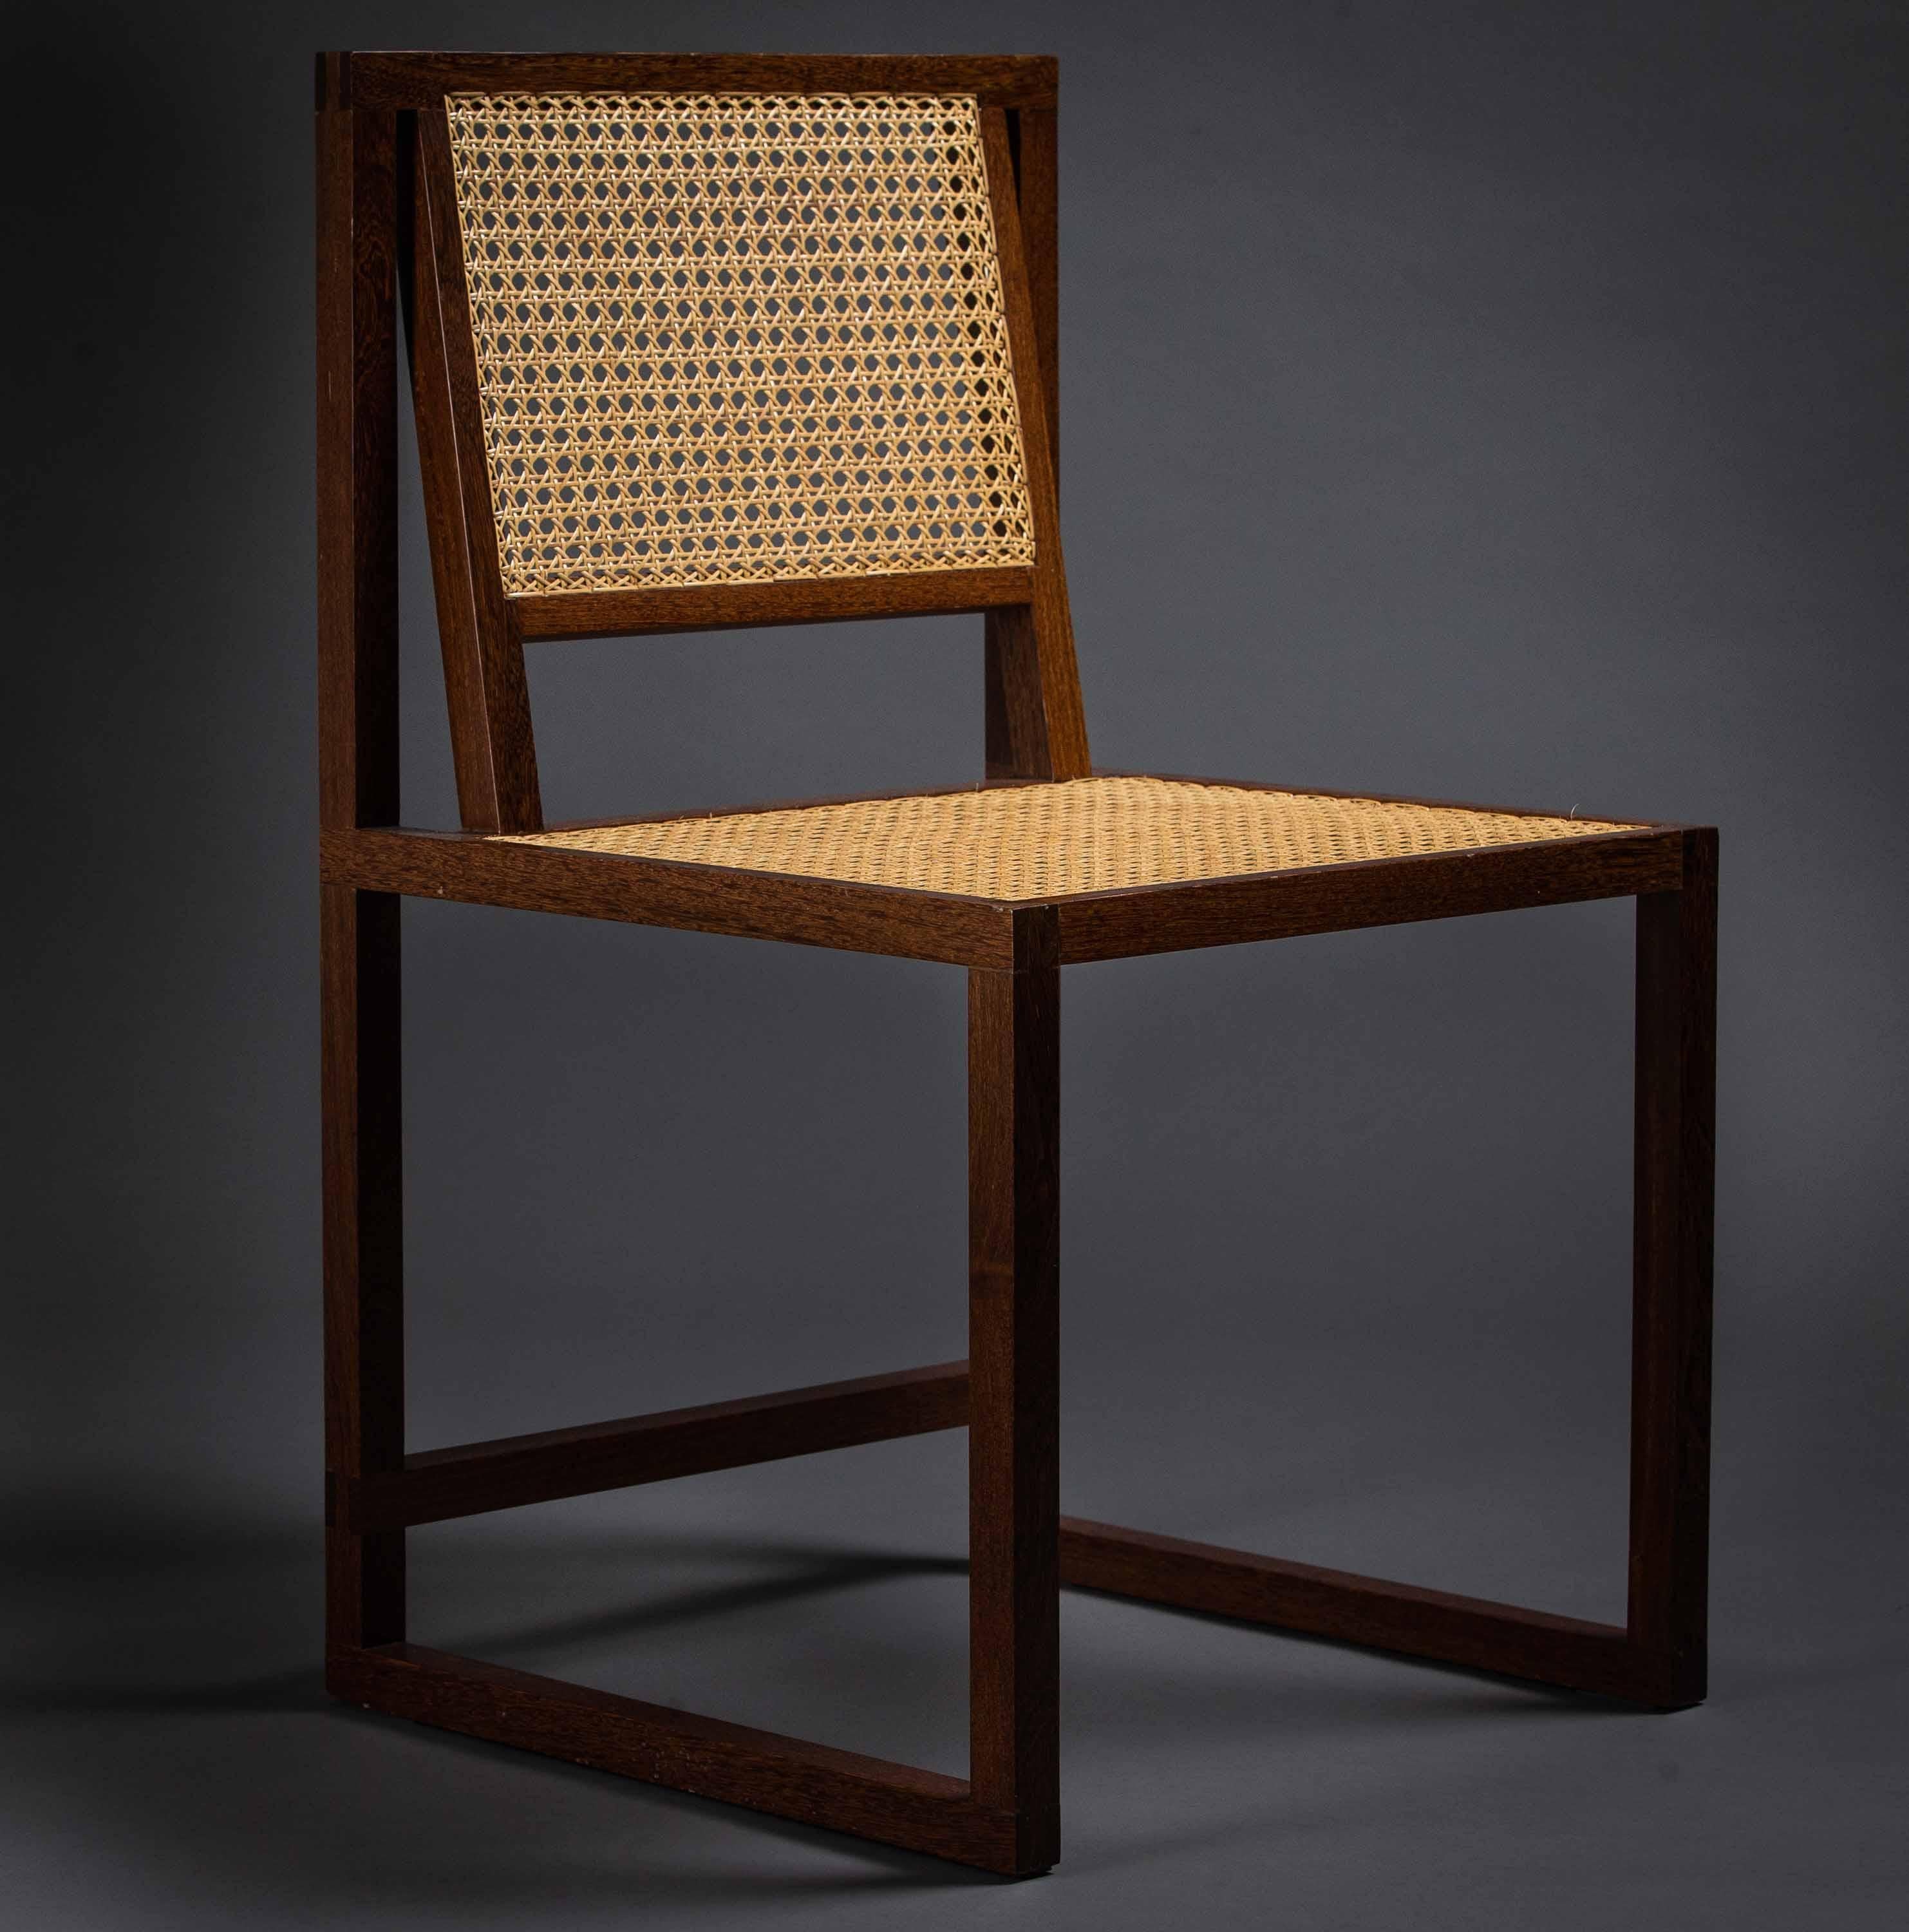 Hand-Crafted The Square Chair. Produced with Solid Wood Using Mortise and Tenon Joinery.  For Sale